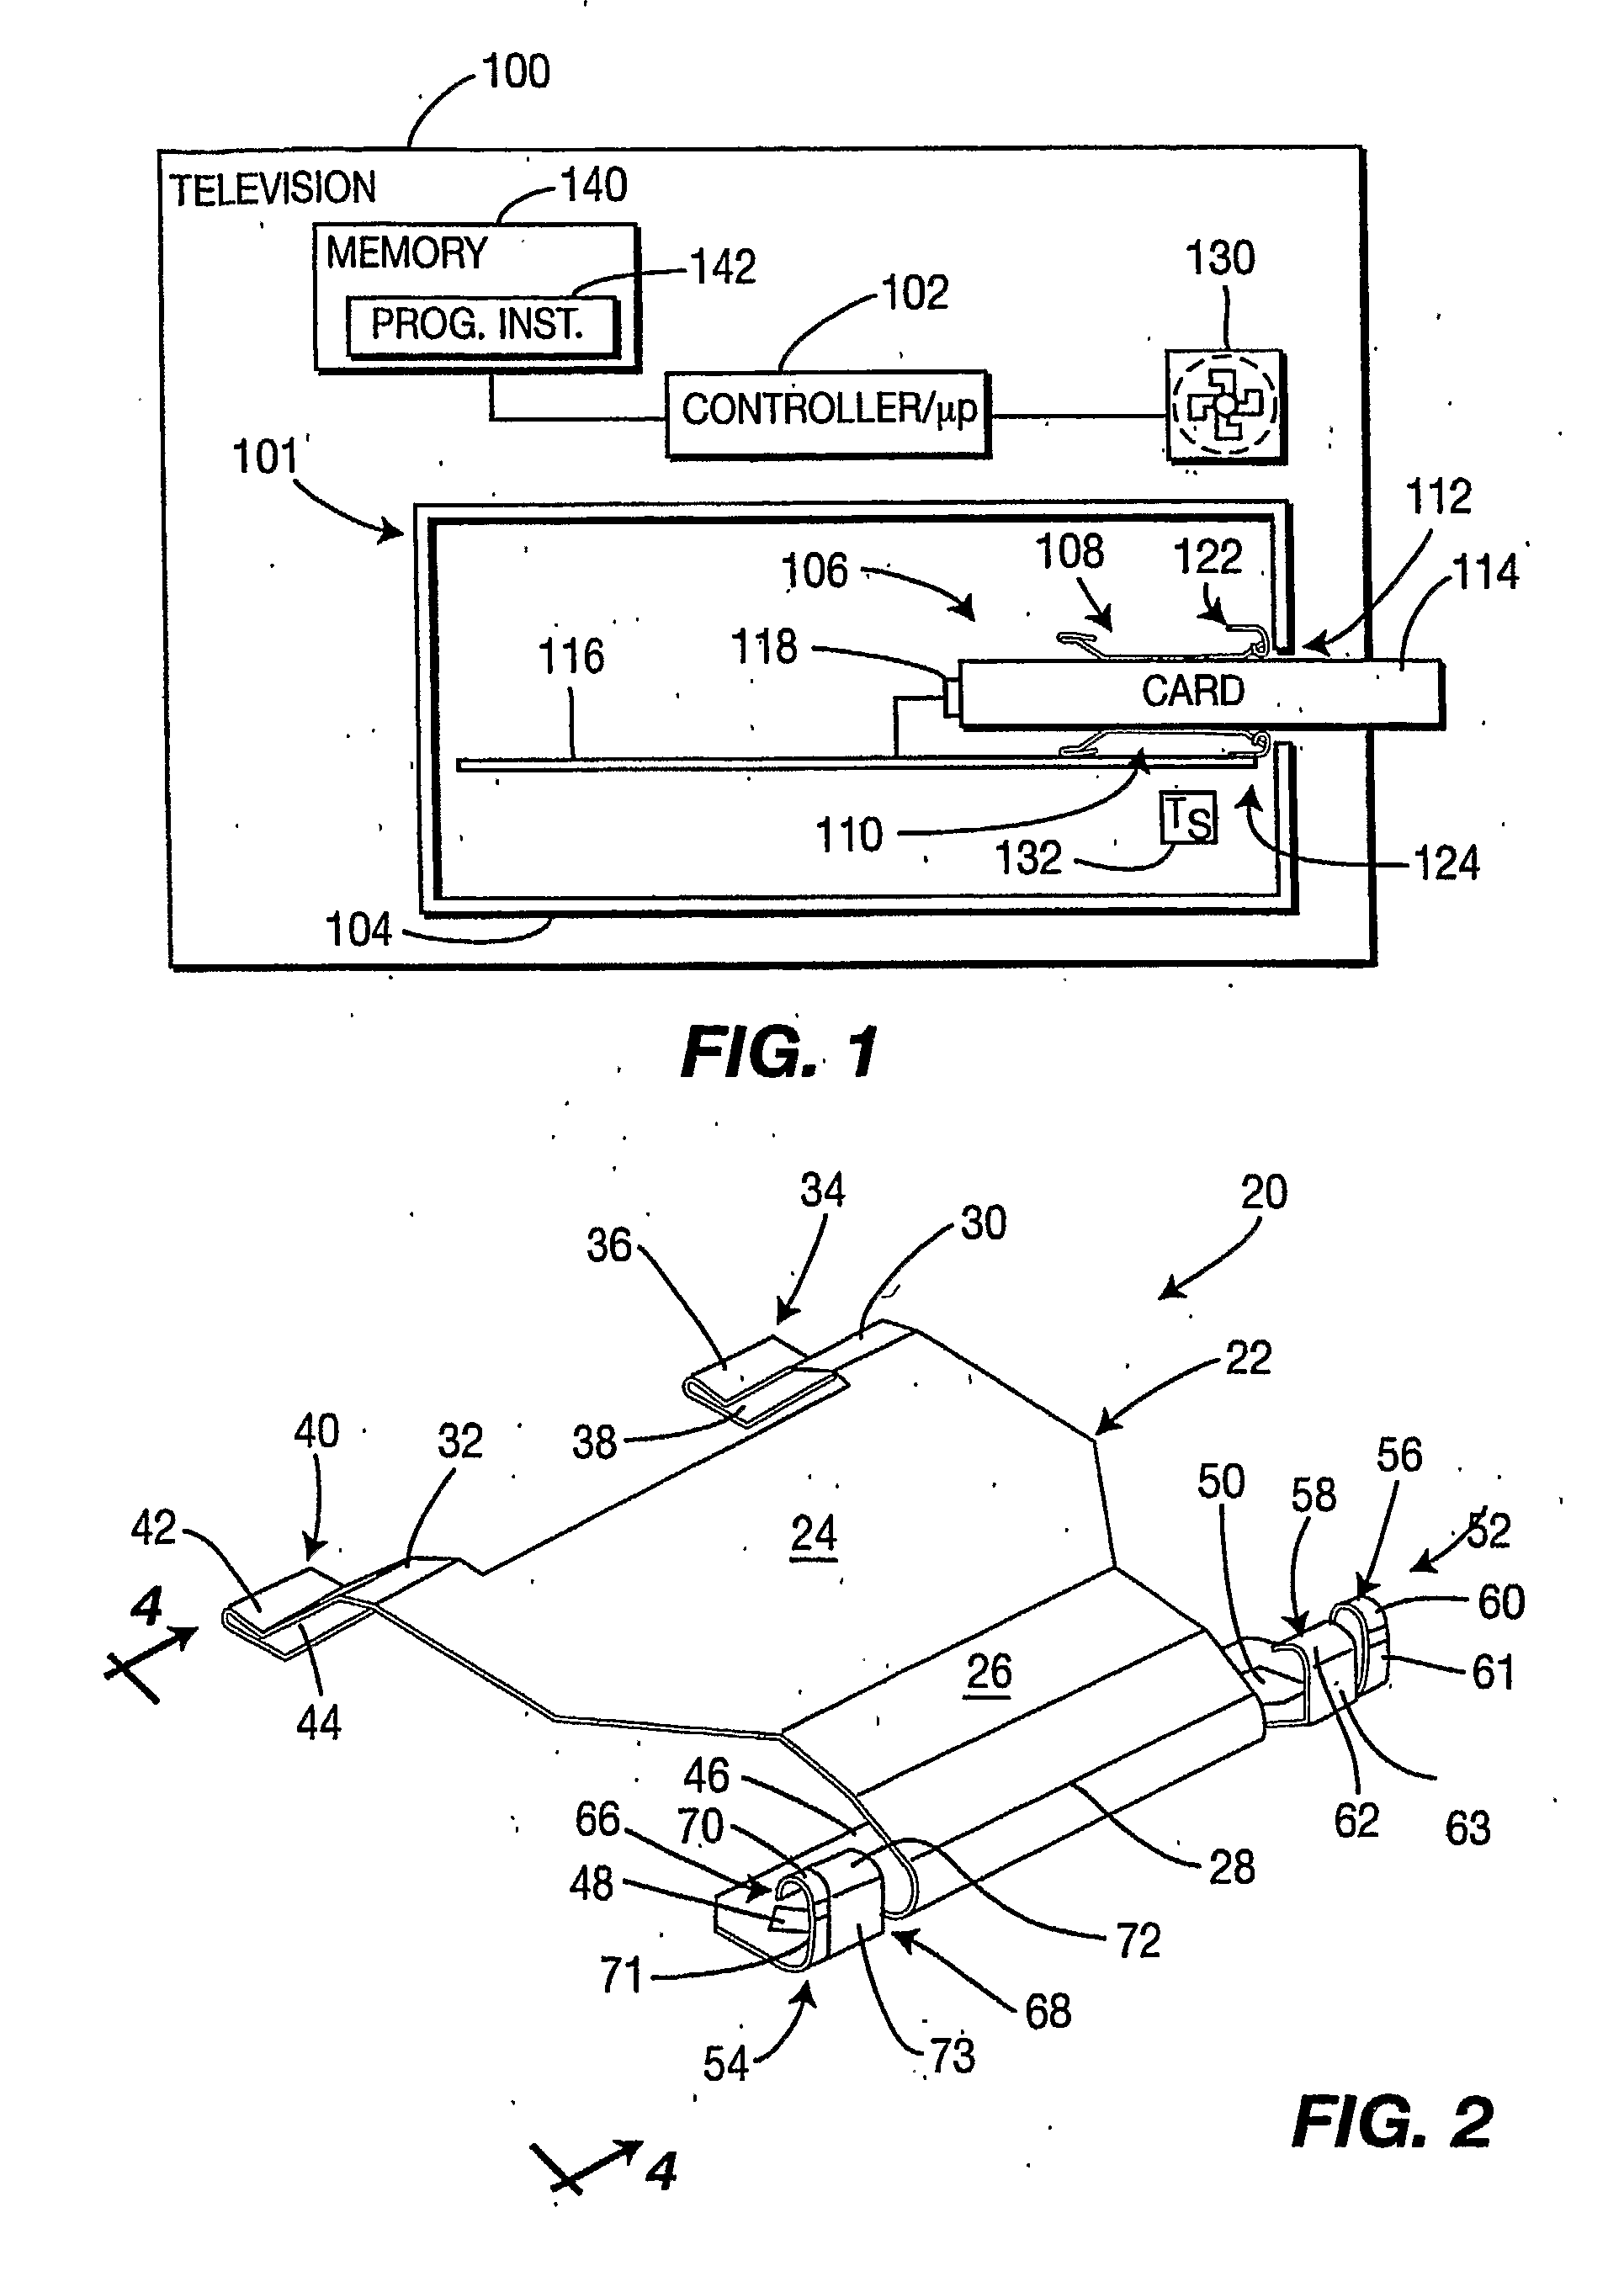 Electromagnetic Interference Shield and Heat Sink Apparatus